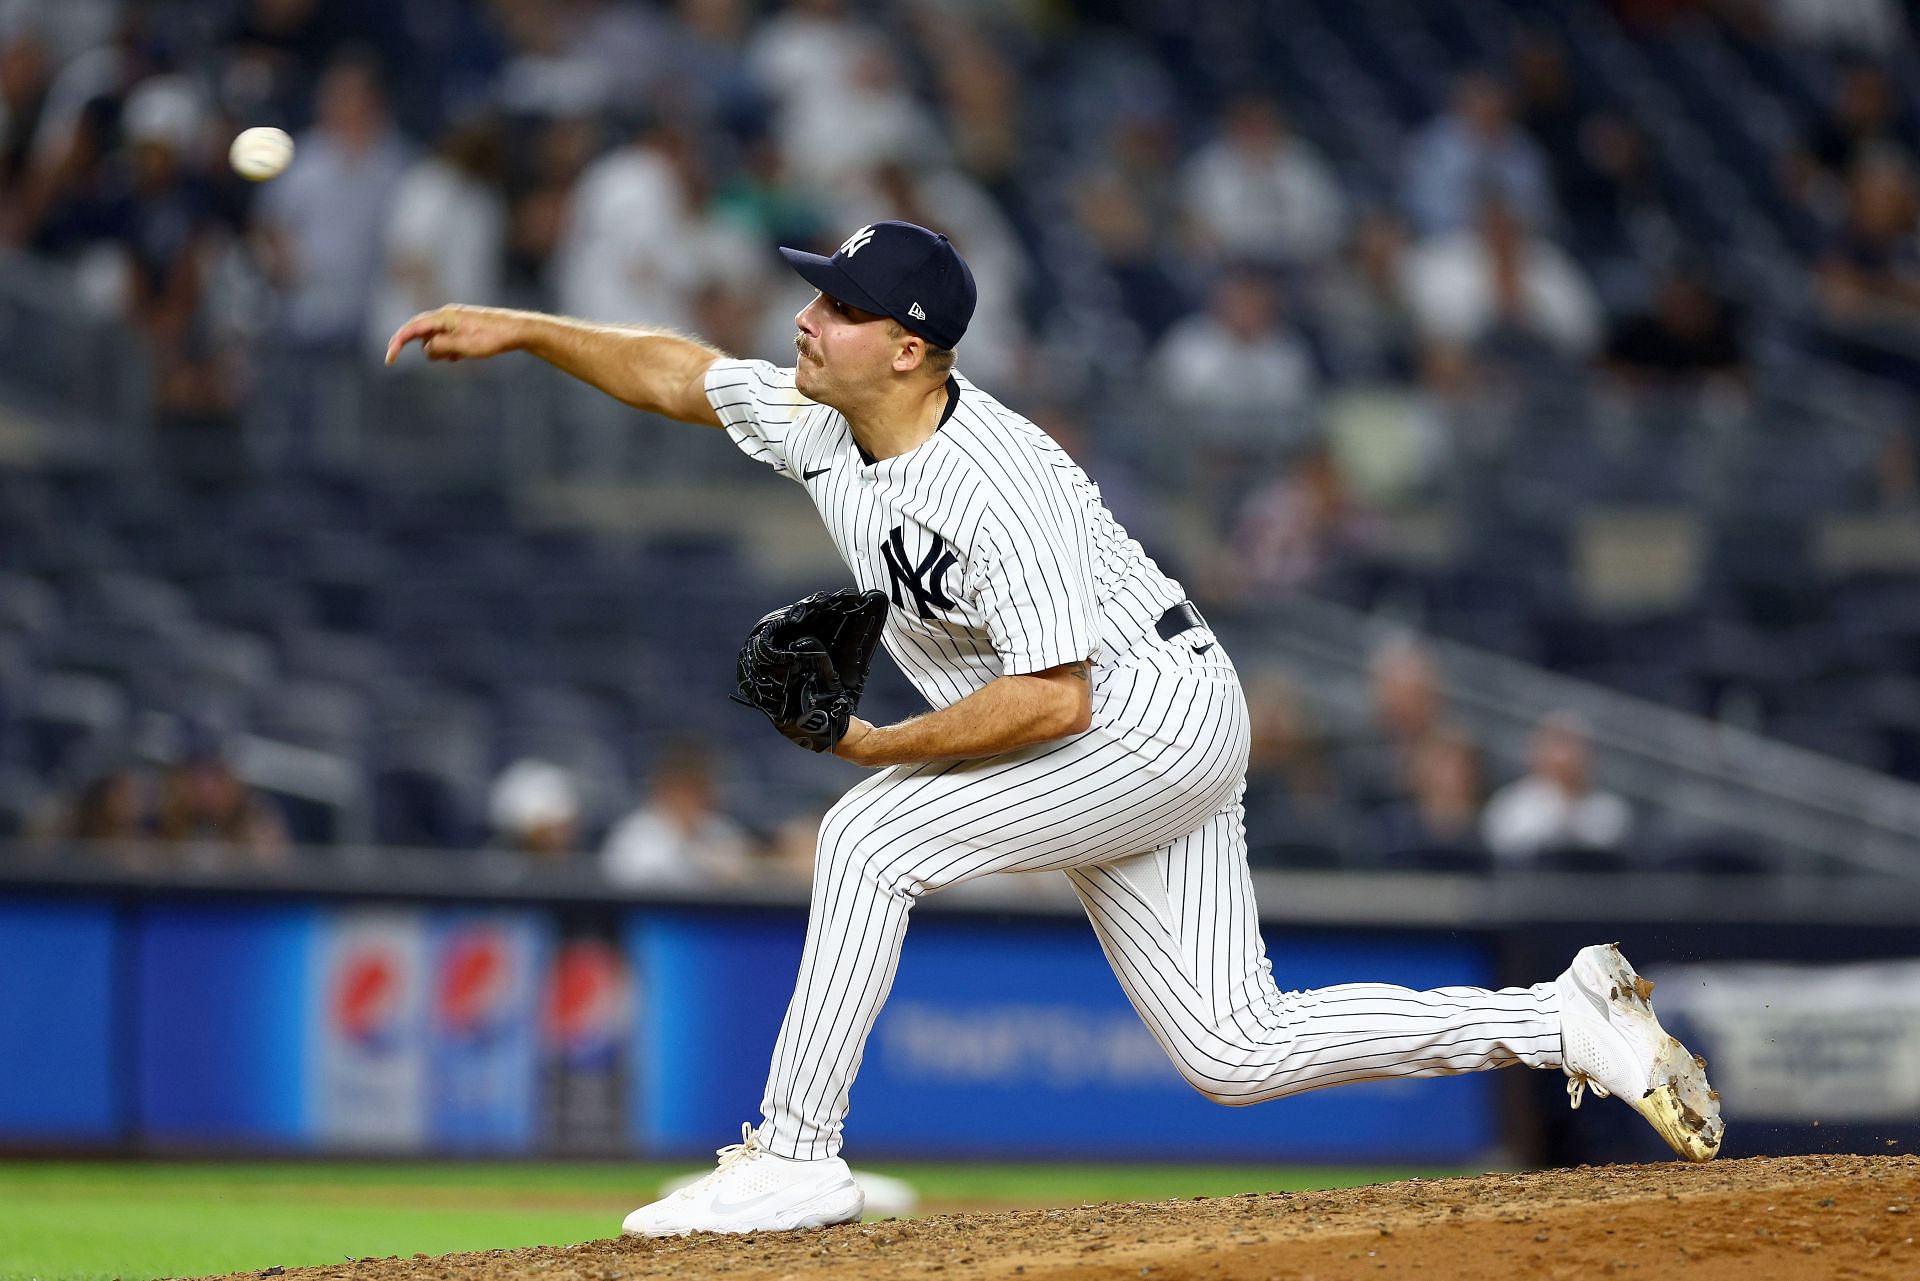 He's had a tough road': Former WSU pitcher Ian Hamilton overcomes  obstacles, sticks in MLB as part of Yankees bullpen